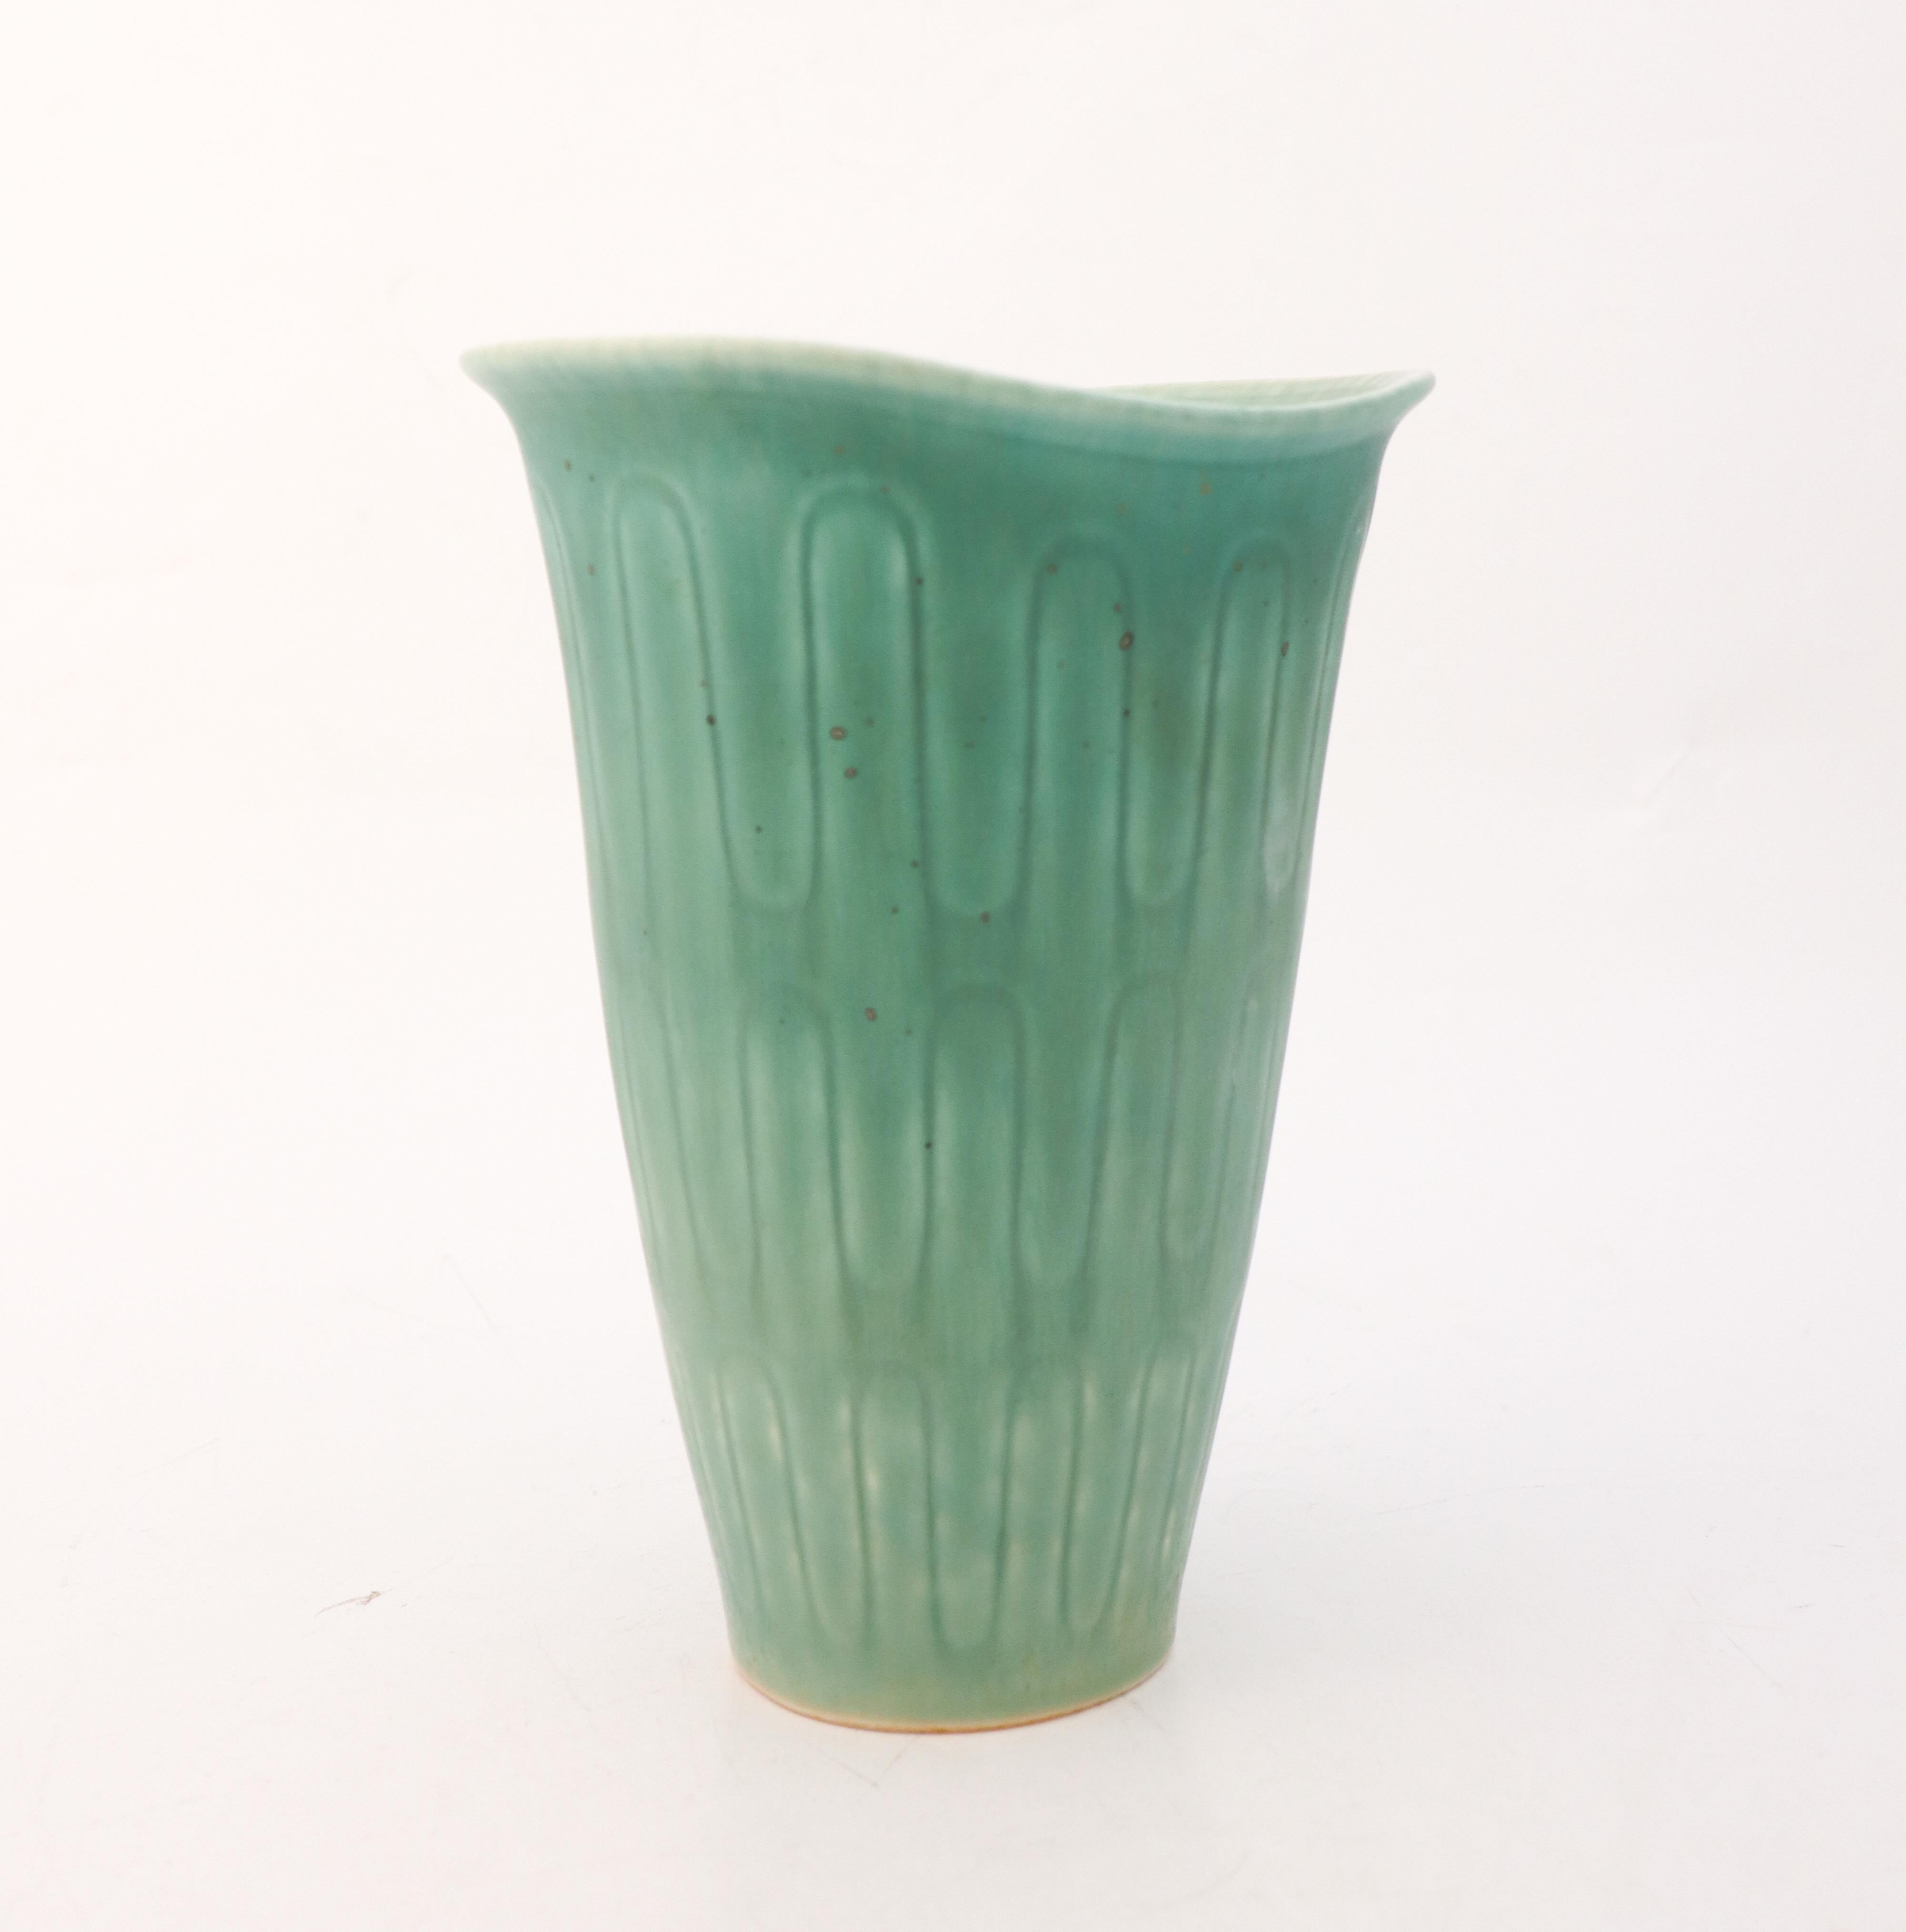 A turquoise vase with a lovely glaze designed by Gunnar Nylund at Rörstrand, the vase is 23 cm (9.3